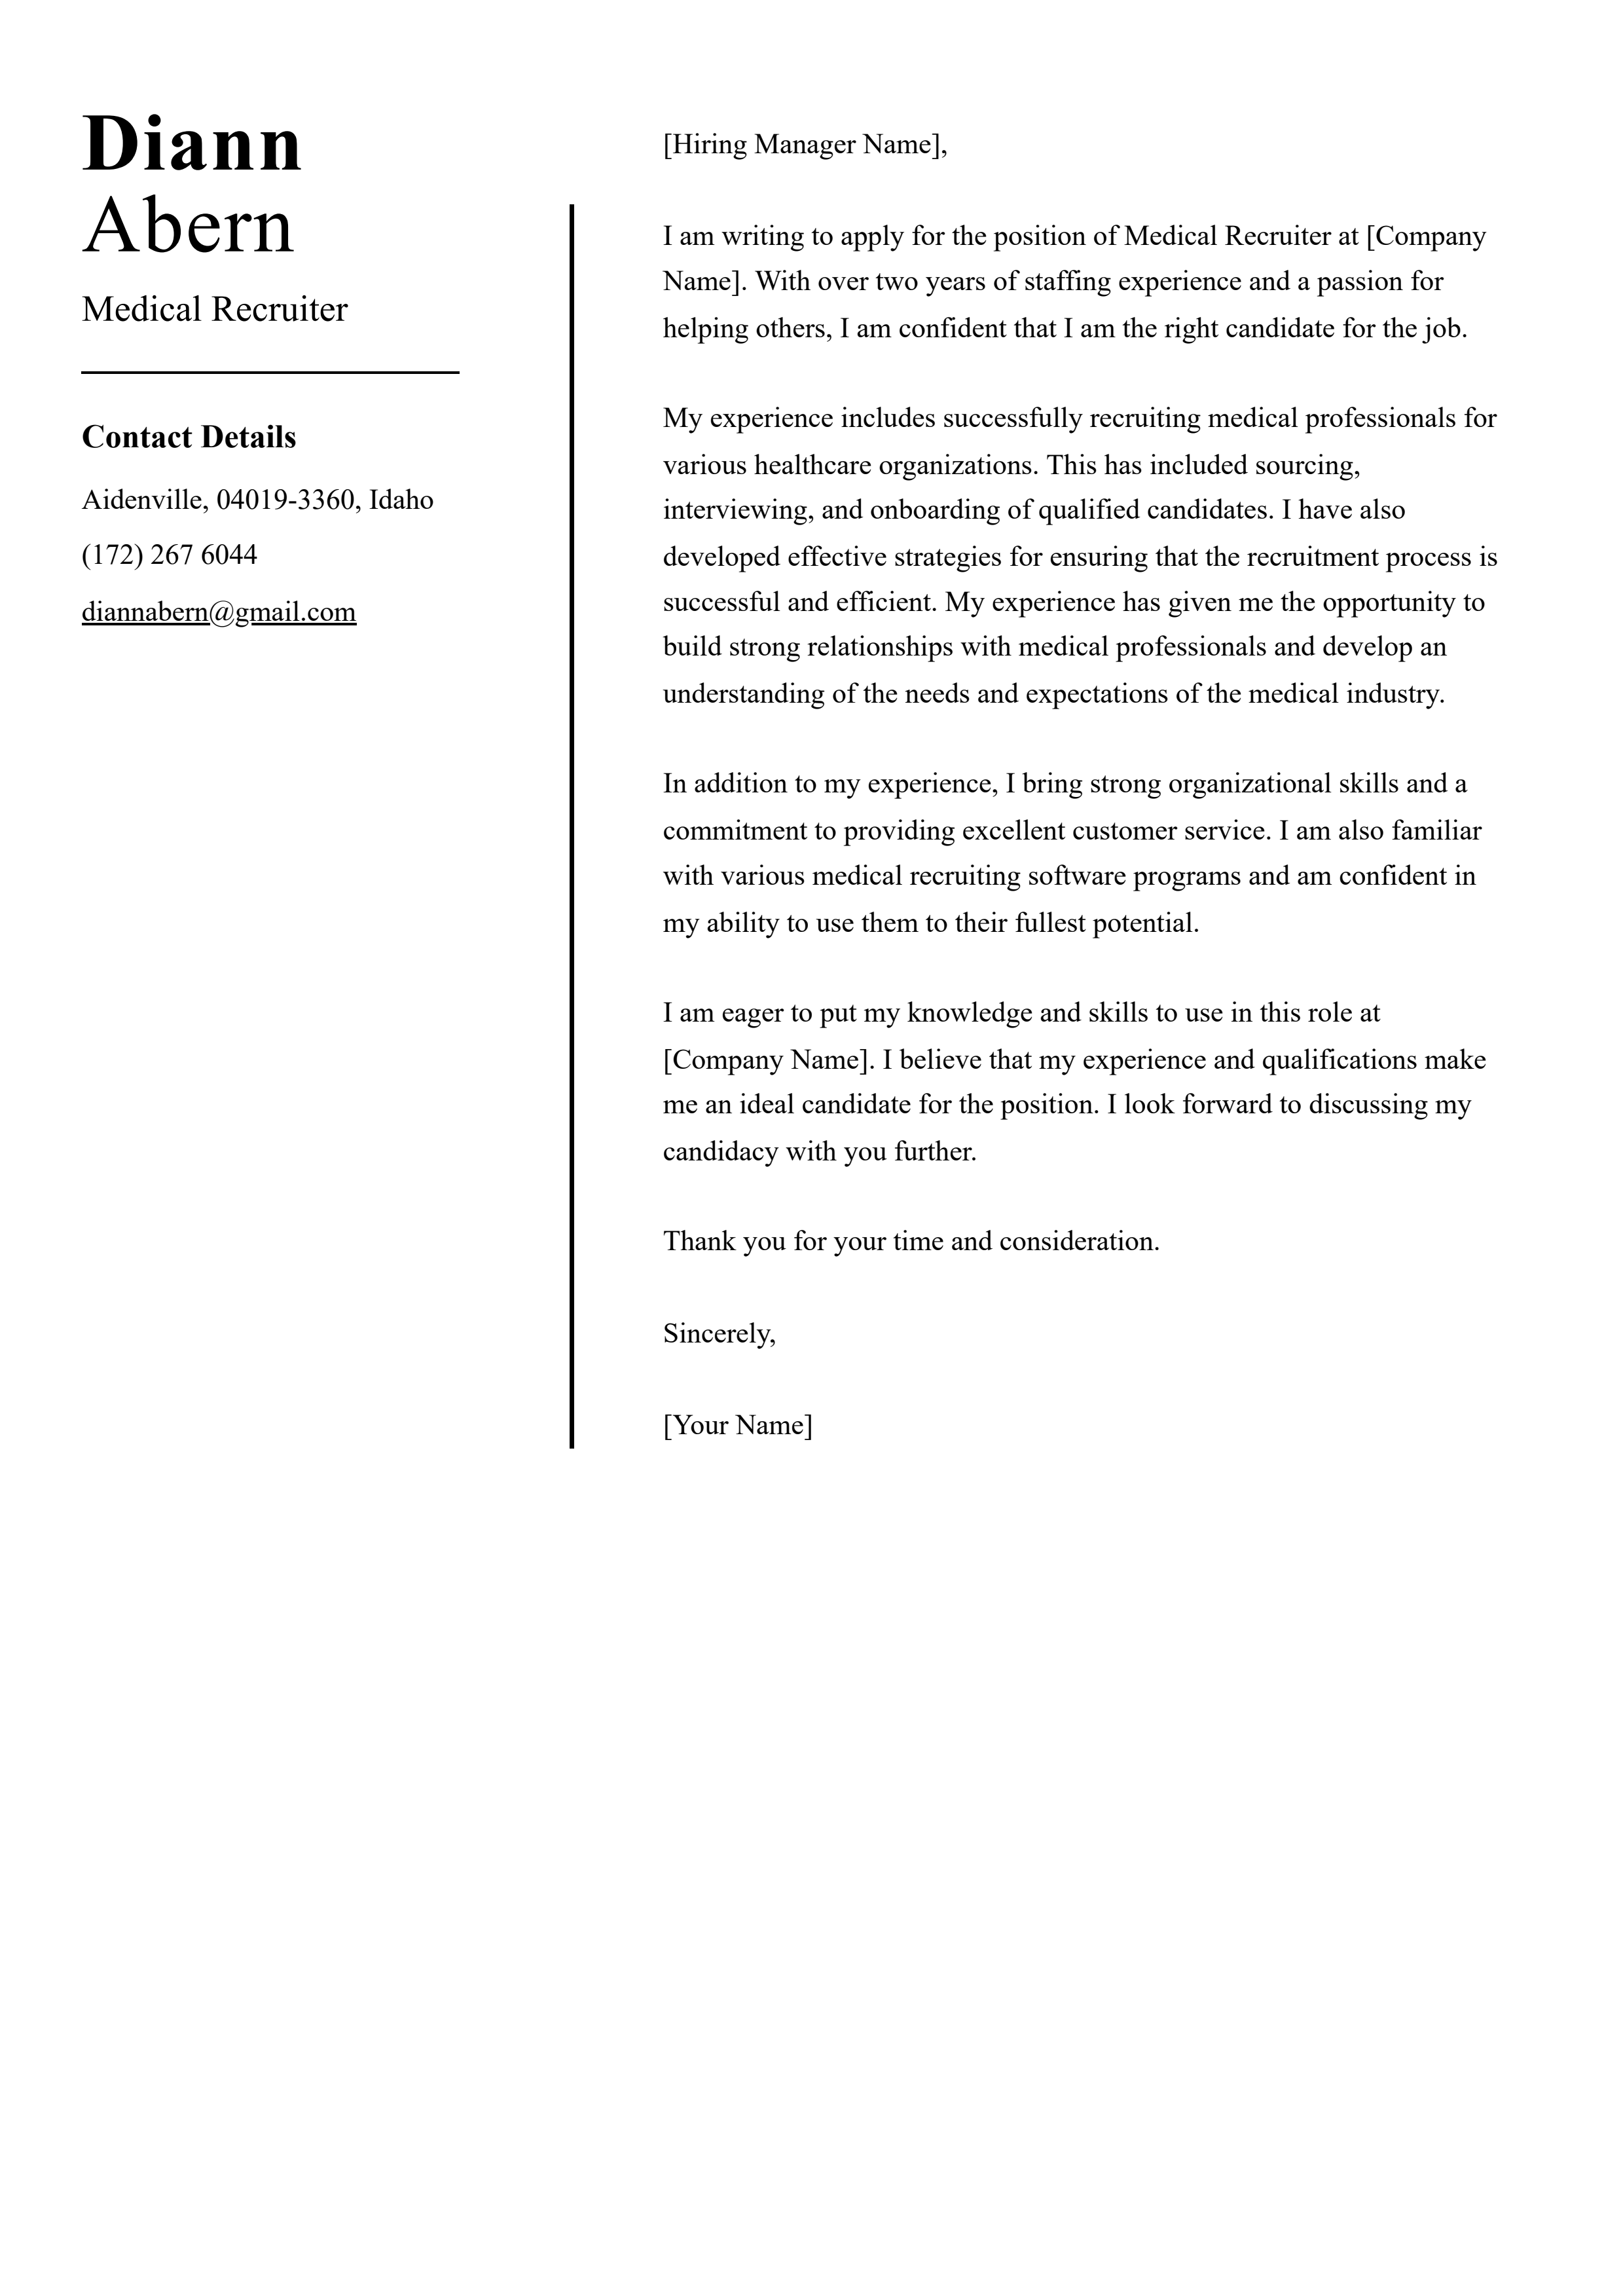 Medical Recruiter Cover Letter Example